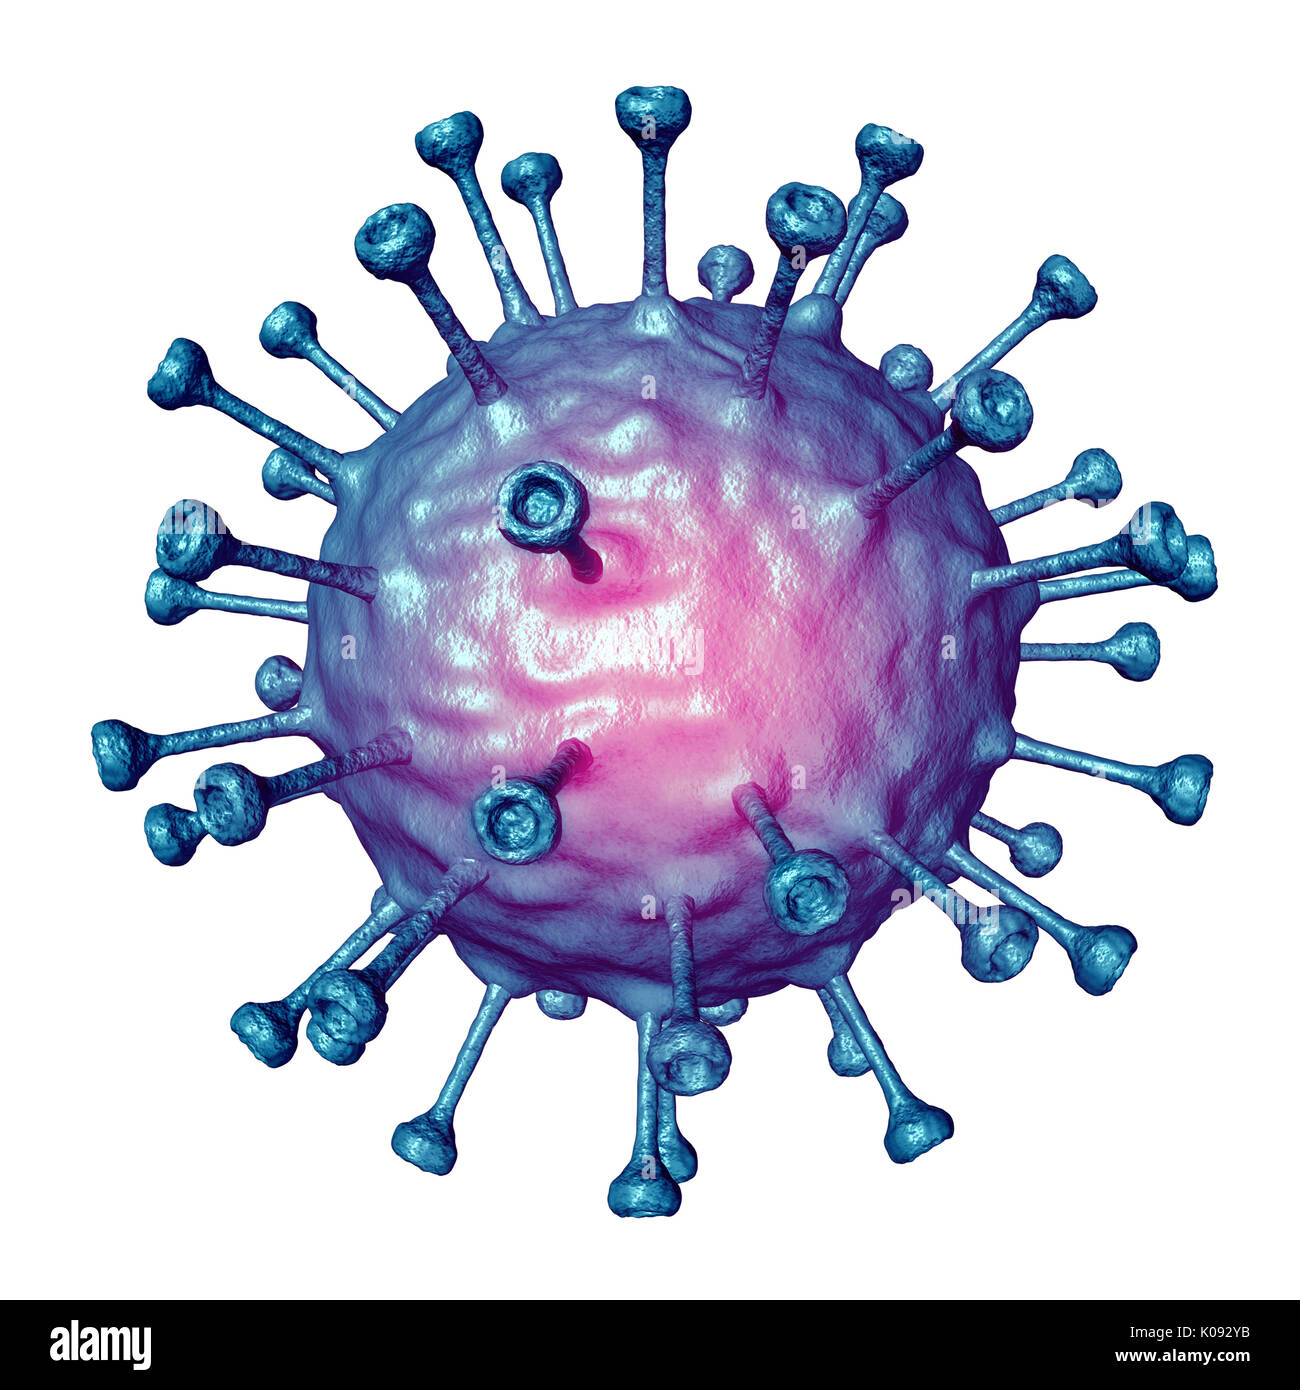 Lymphocyte cell concept as an immune system cell representing the control of cancer through immunology or immunotherapy as an oncology. Stock Photo